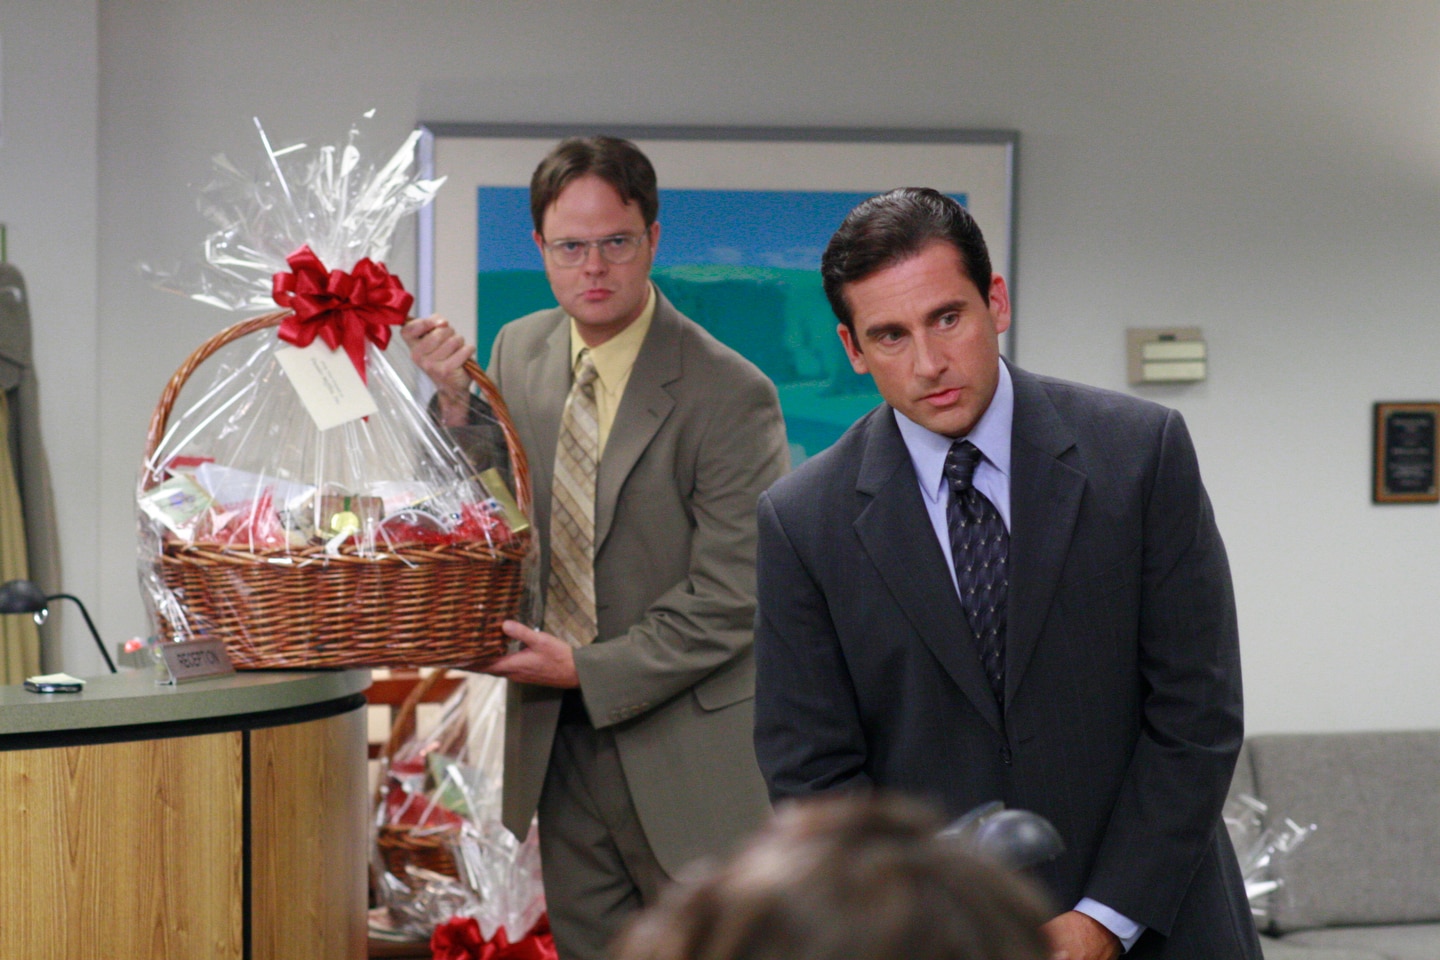 The Office 4x02 Dunder Mifflin Infinity Picspam